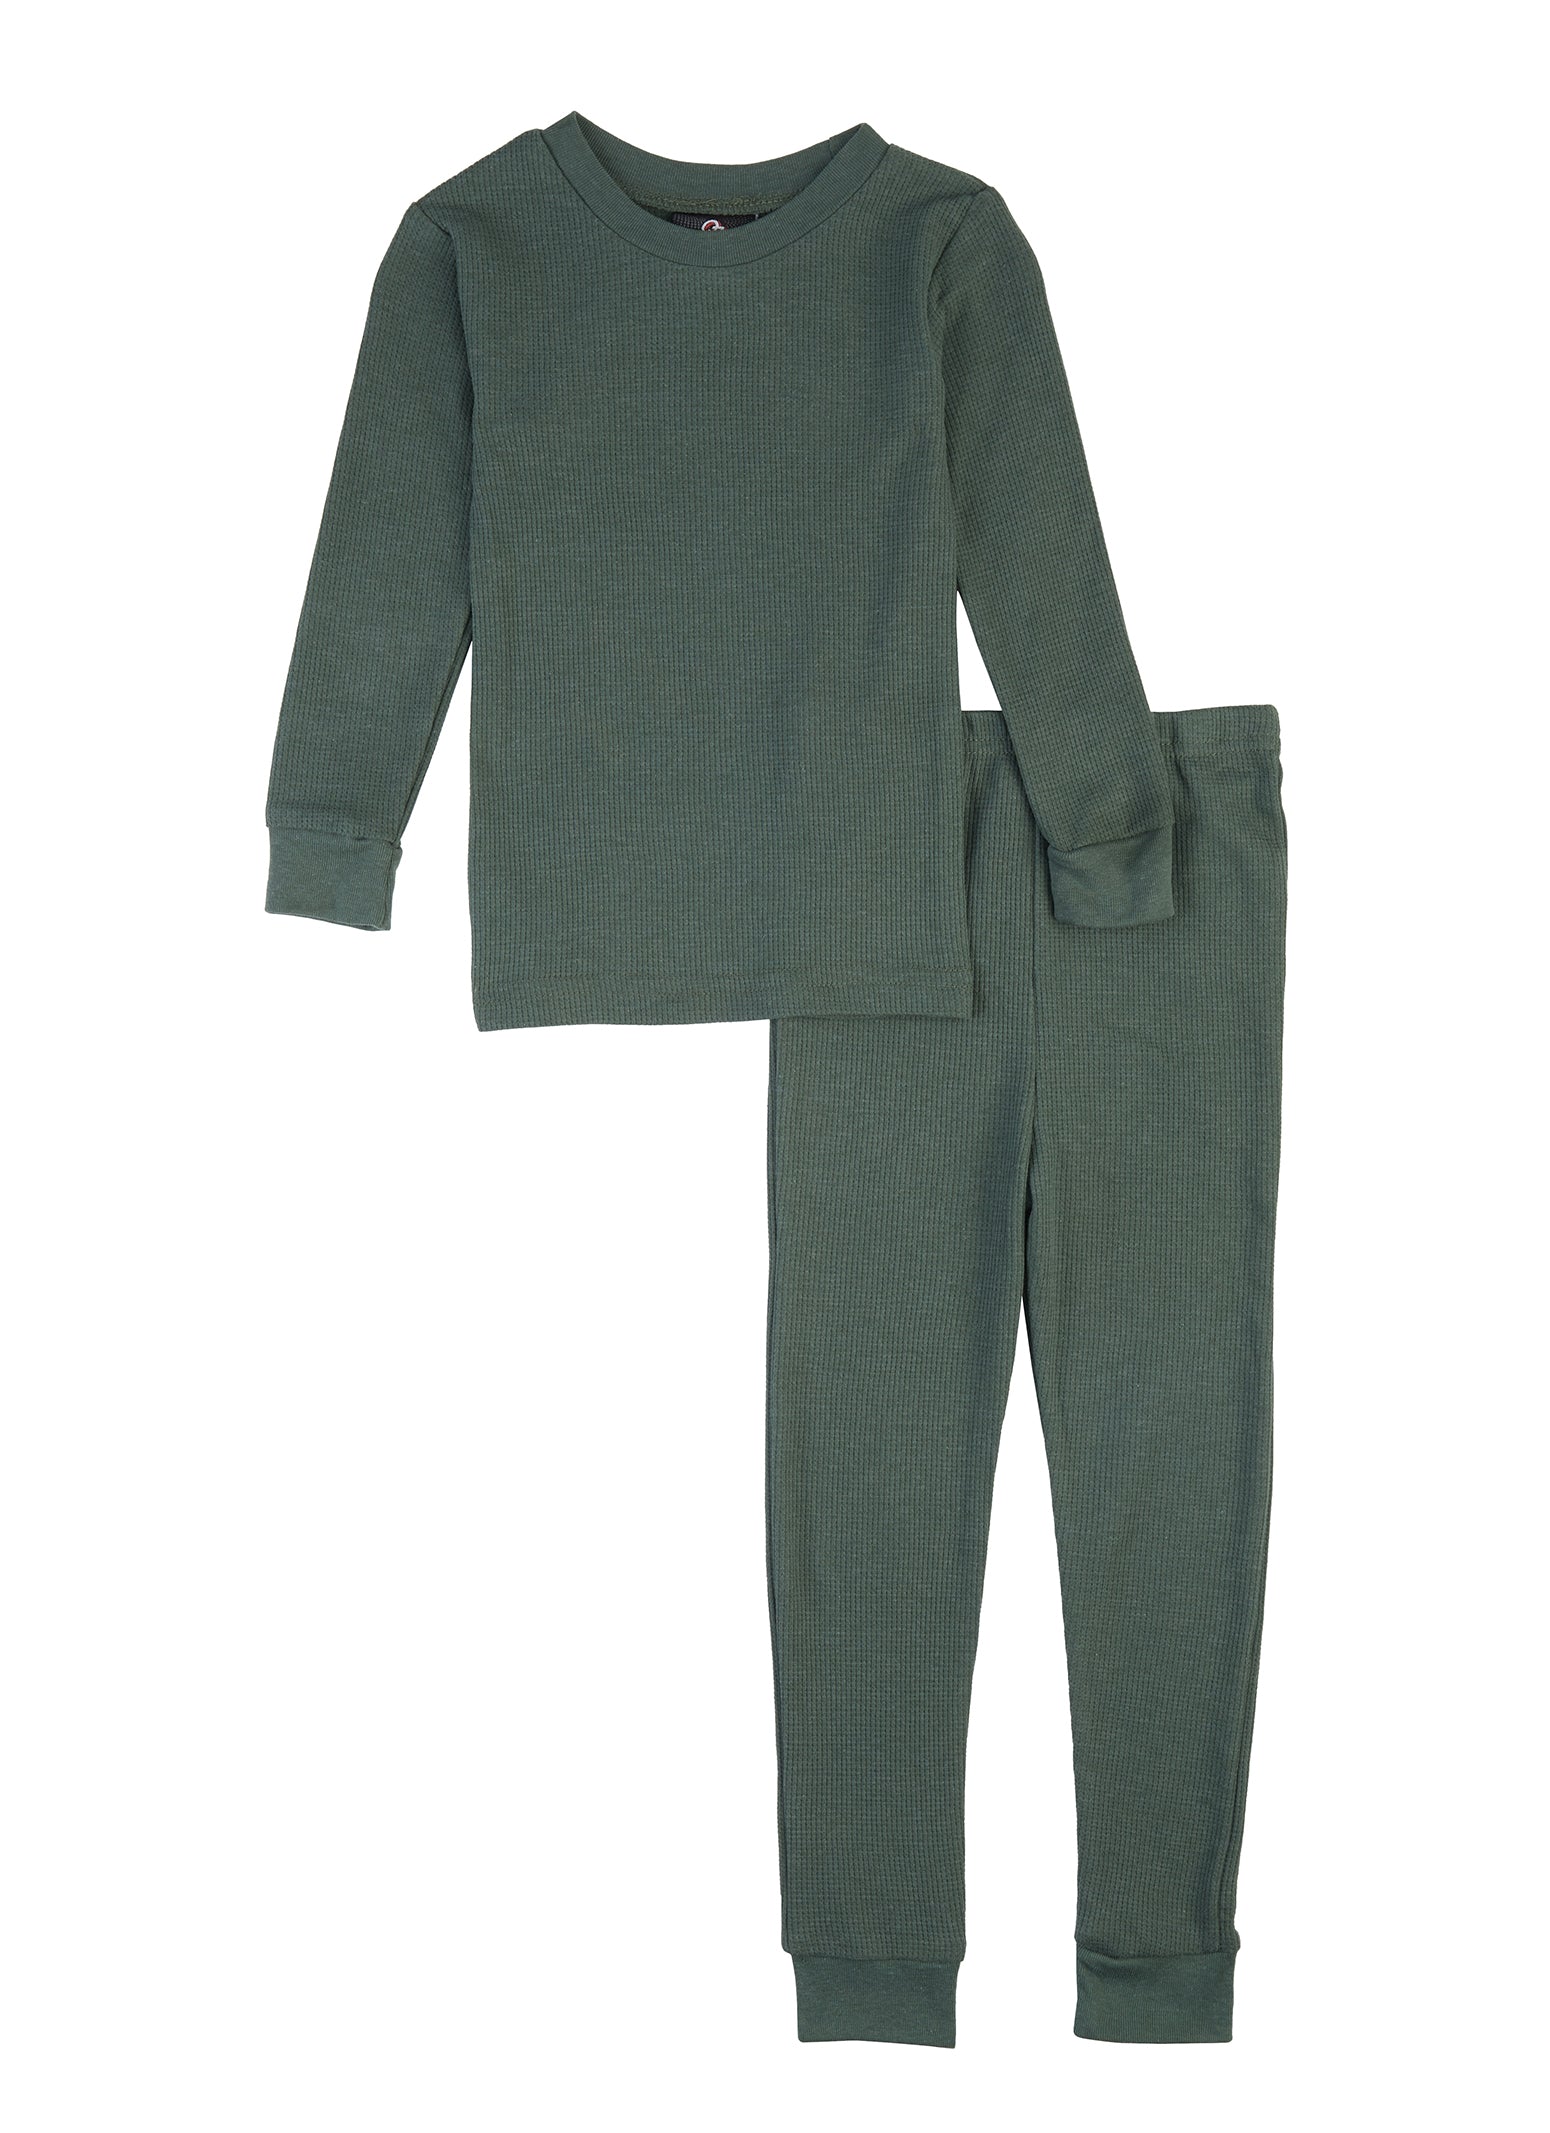 Little Boys Solid Thermal Top and Pants